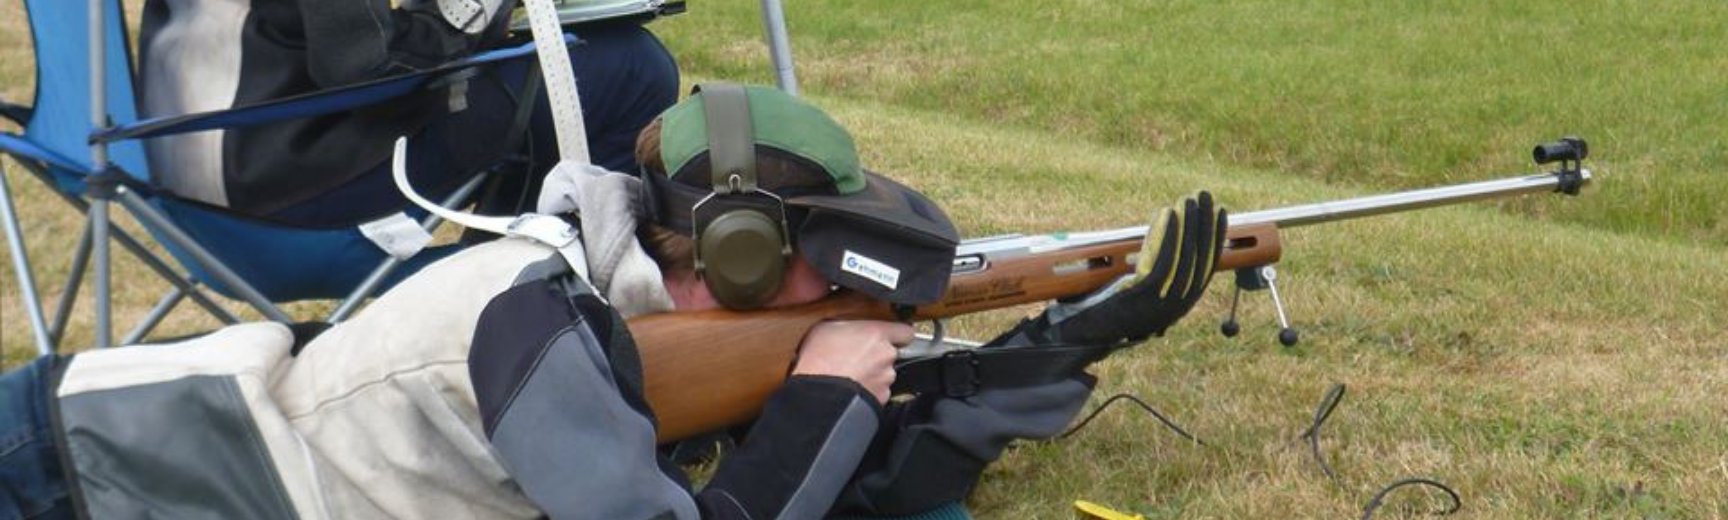 A man shooting a rifle from a prone position on the grass